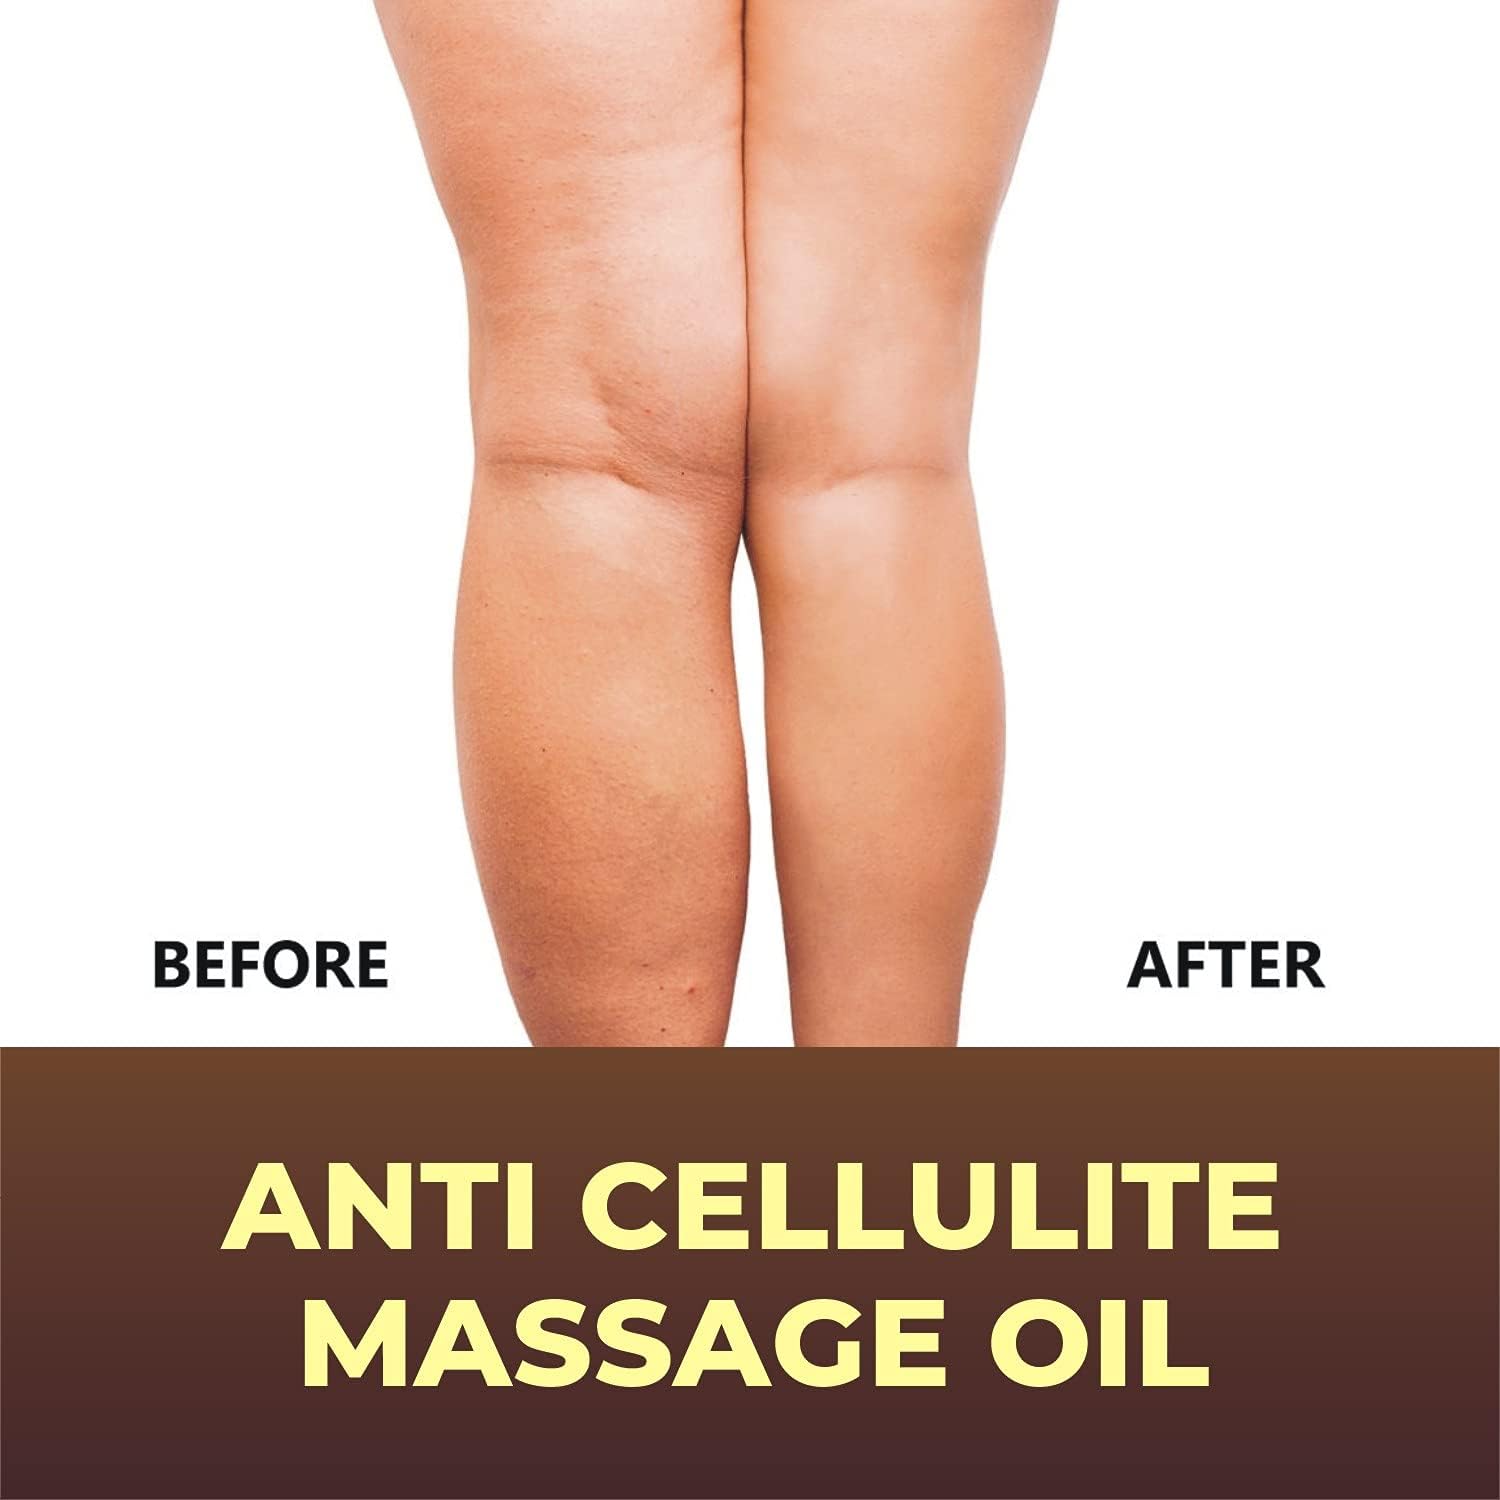 Anti Cellulite Massage Oil - Infused w/Collagen & Stem Cell - 100% Nat